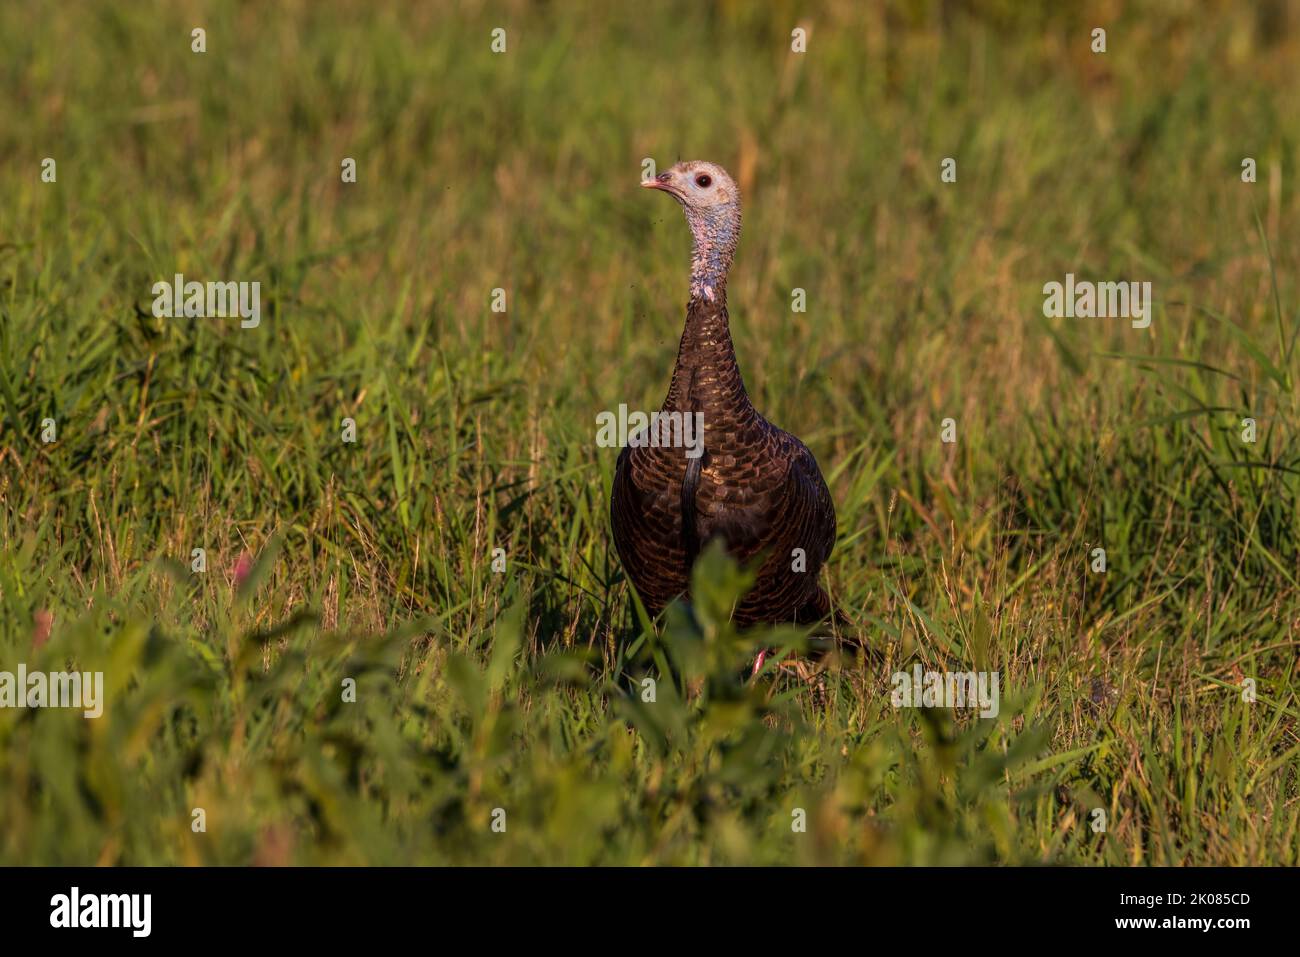 Hen turkey with a long beard in northern Wisconsin. Stock Photo